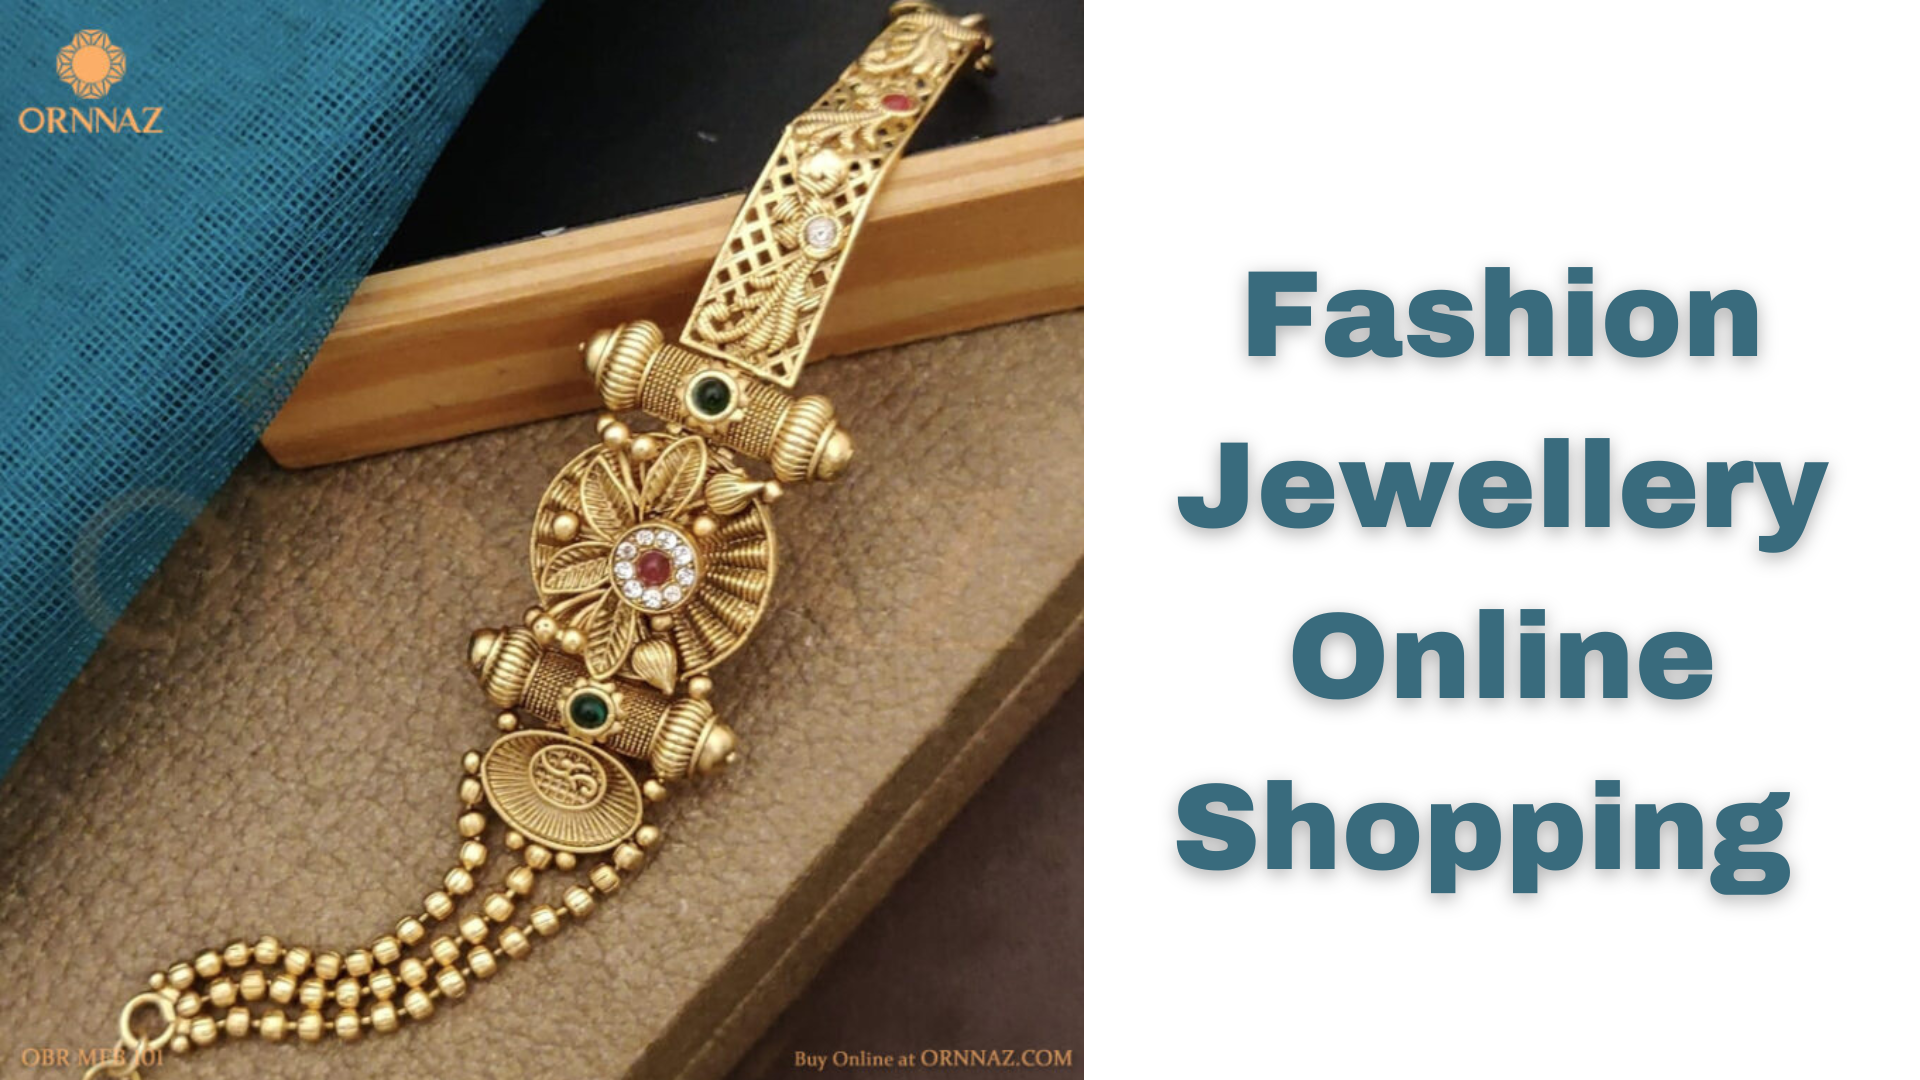 Fashion Jewellery Online Shopping — Buy Fashionable Ornaments at Best Price  in India | by Shrutisinha | Medium